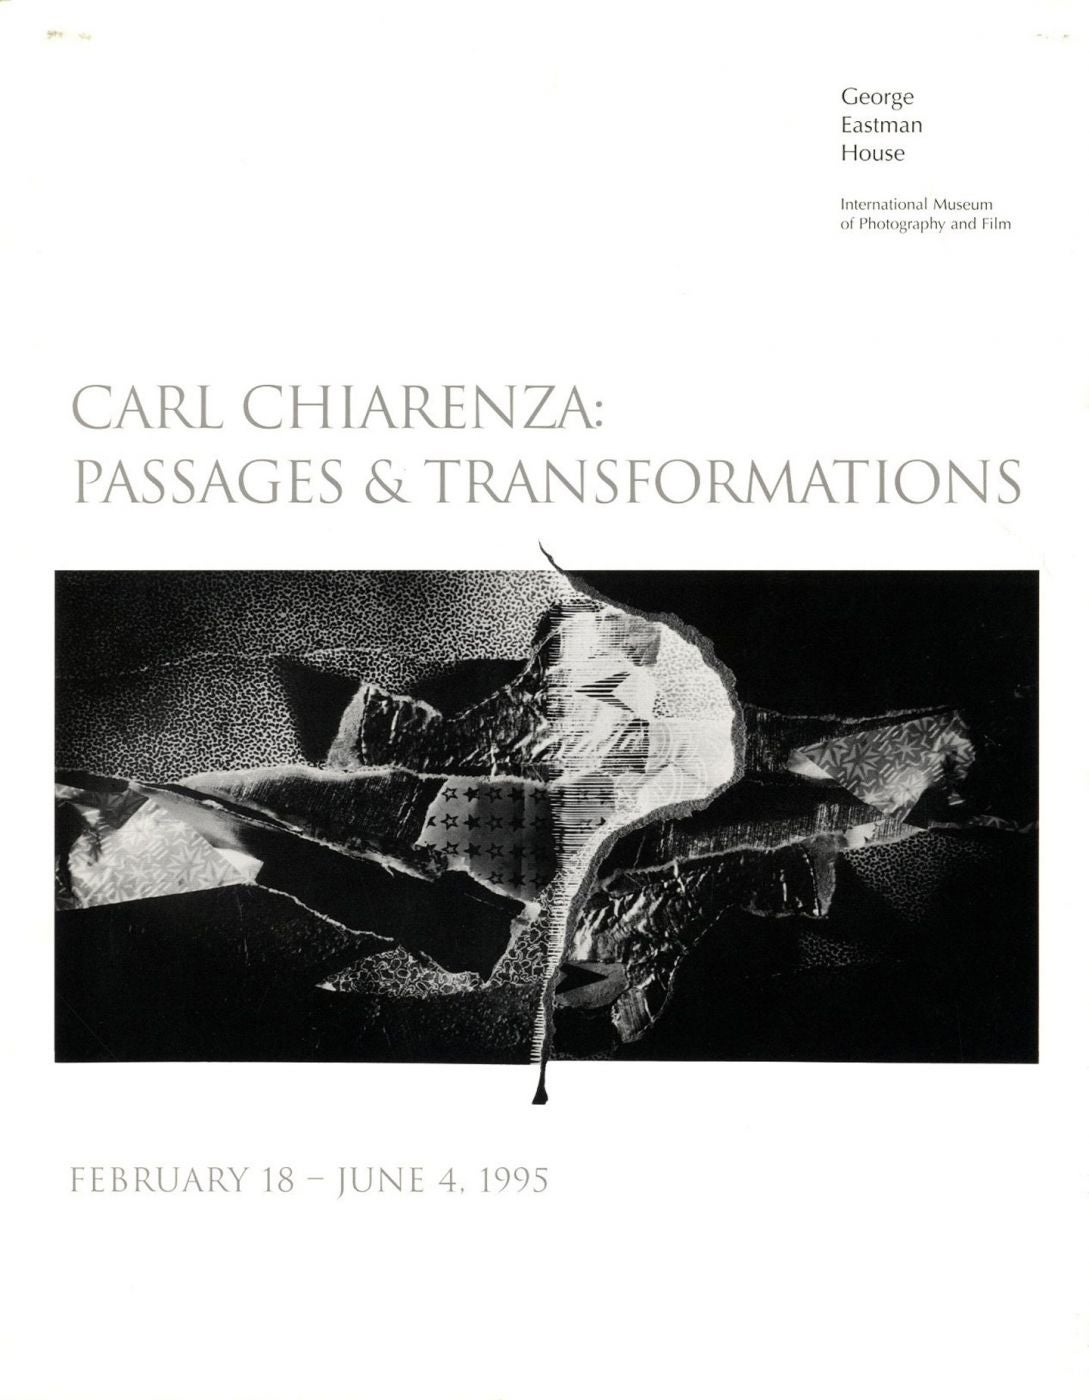 Carl Chiarenza: Passages and Transformations (Exhibition Brochure) [SIGNED ASSOCIATION COPY]